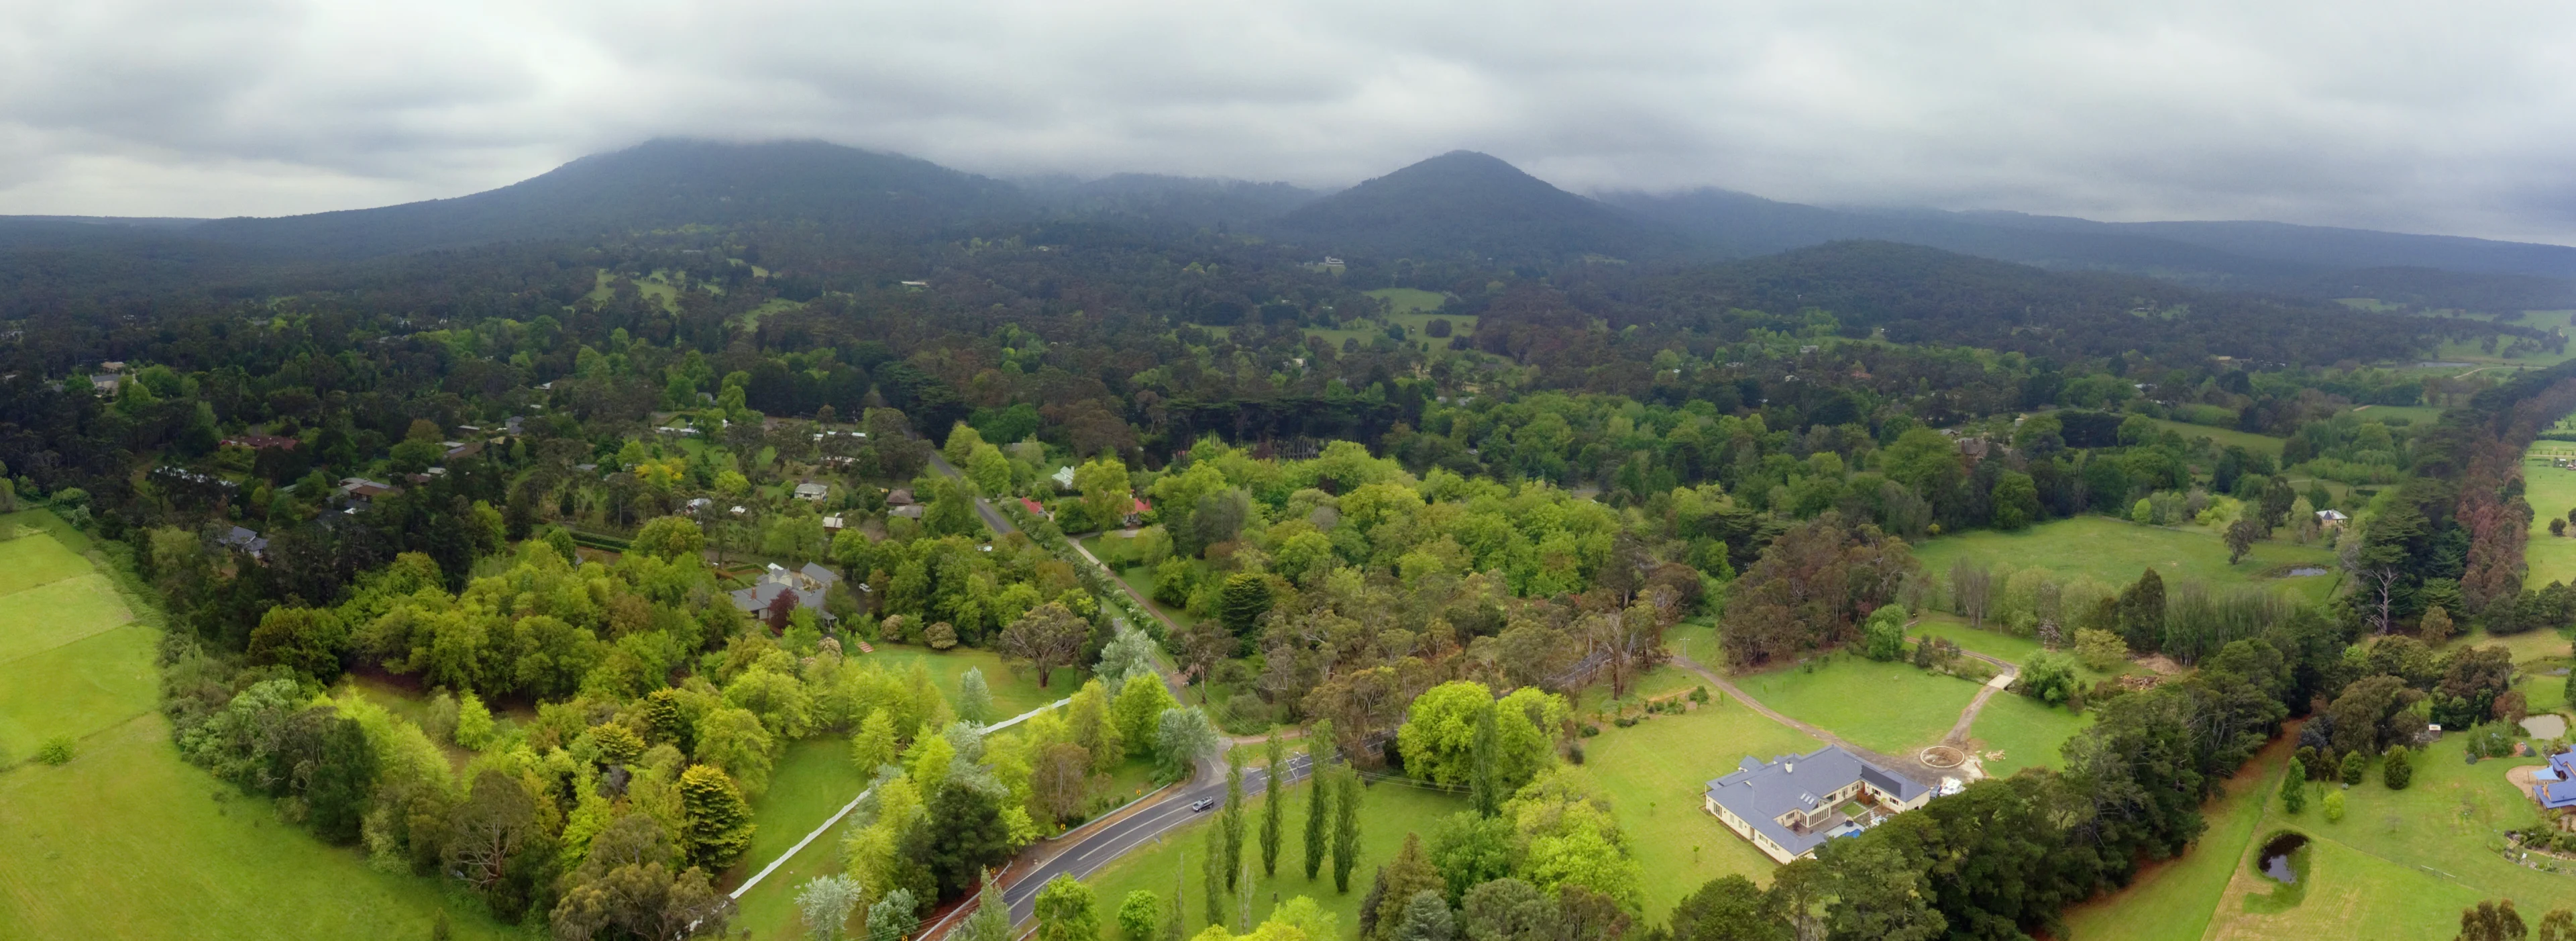 Mount Macedon from the Air. 